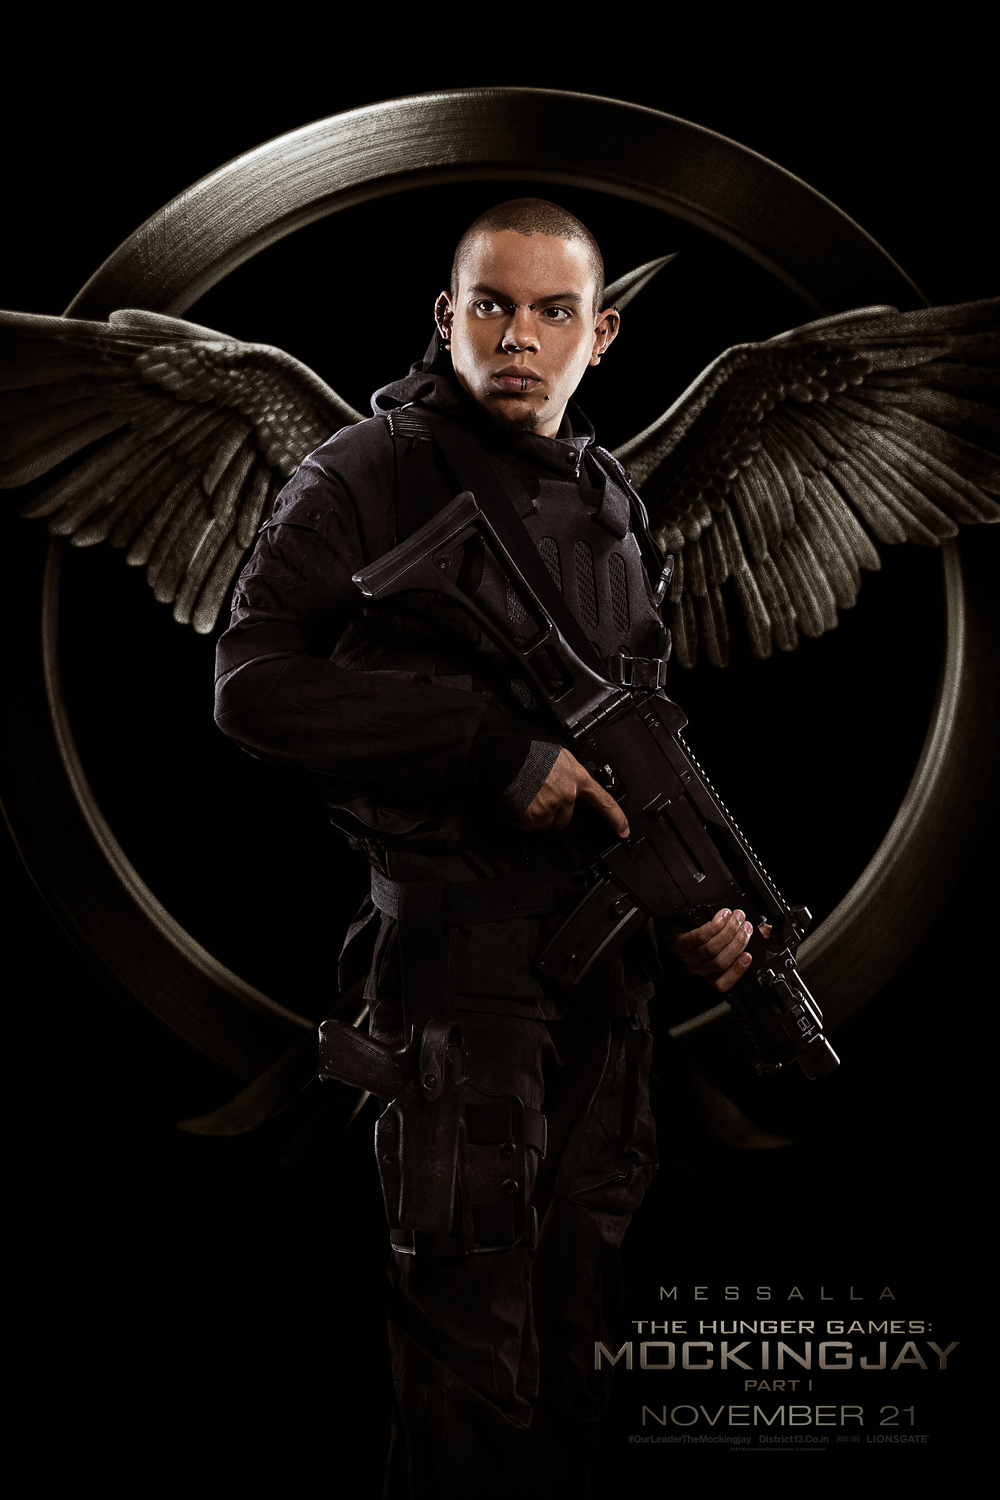 The Hunger Games Mockingjay Part 1 First Look ... - Time